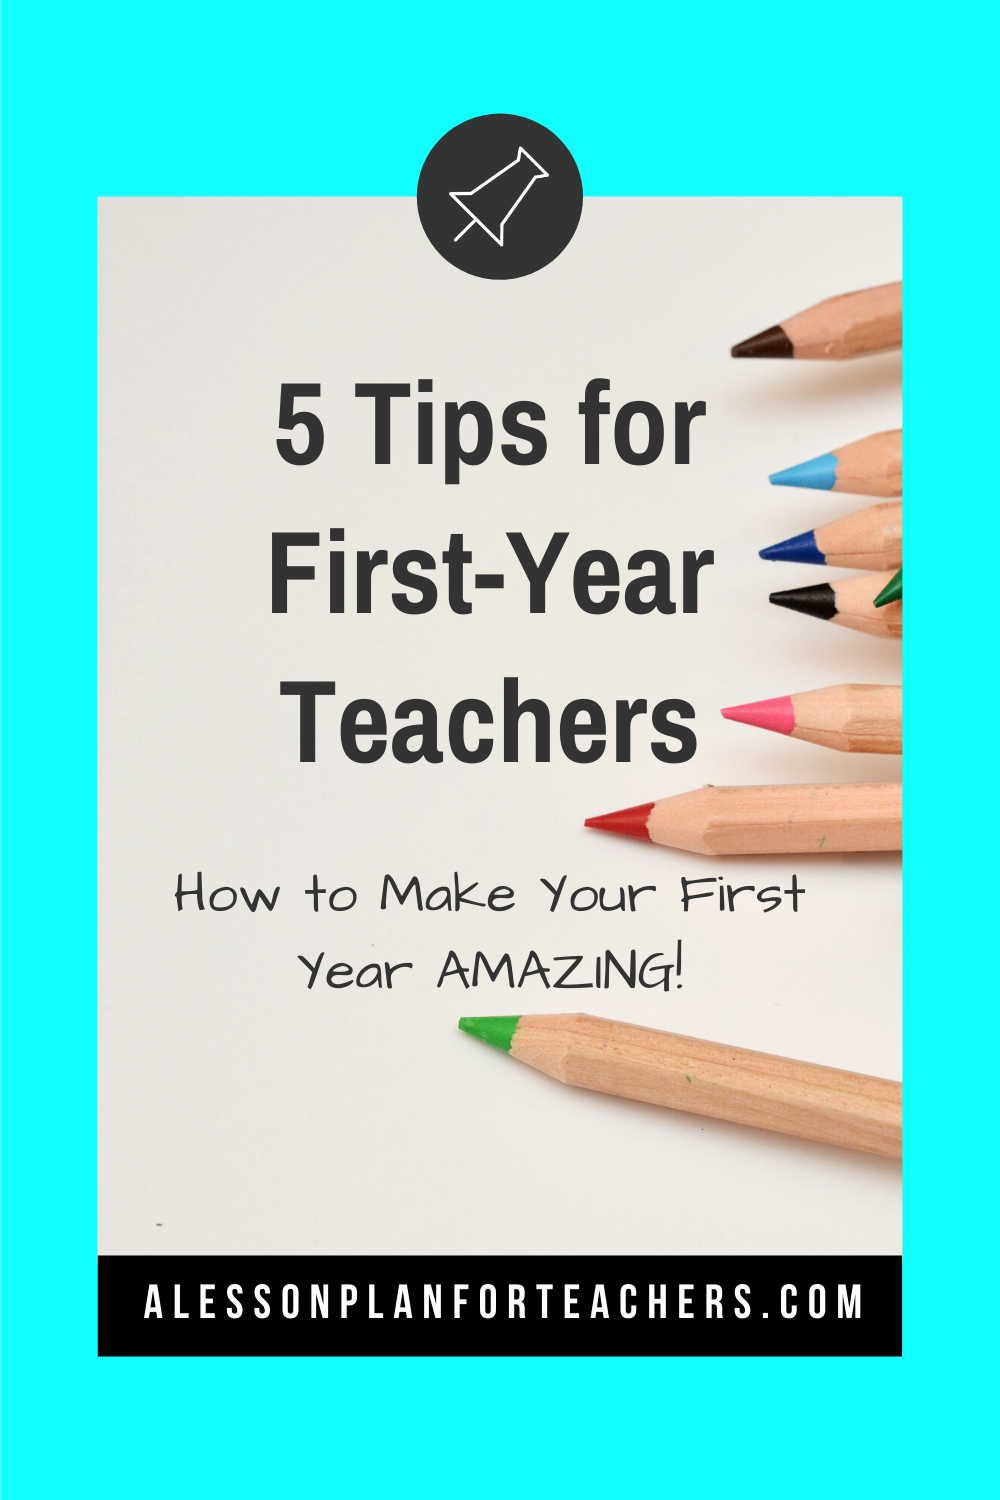 As you enter your first year as a classroom teacher, proceed with confidence! You are educated, you are prepared, and you are competent! You will change lives in your classroom, and following these 5 tips for first year teachers will set you, and your students, up for success! If ever you doubt your teaching skills, return to these 5 basic tips to jump-start your success.  #teachertips #secondaryteacher #socialstudiesteacher #tipsforteachers #newteachers